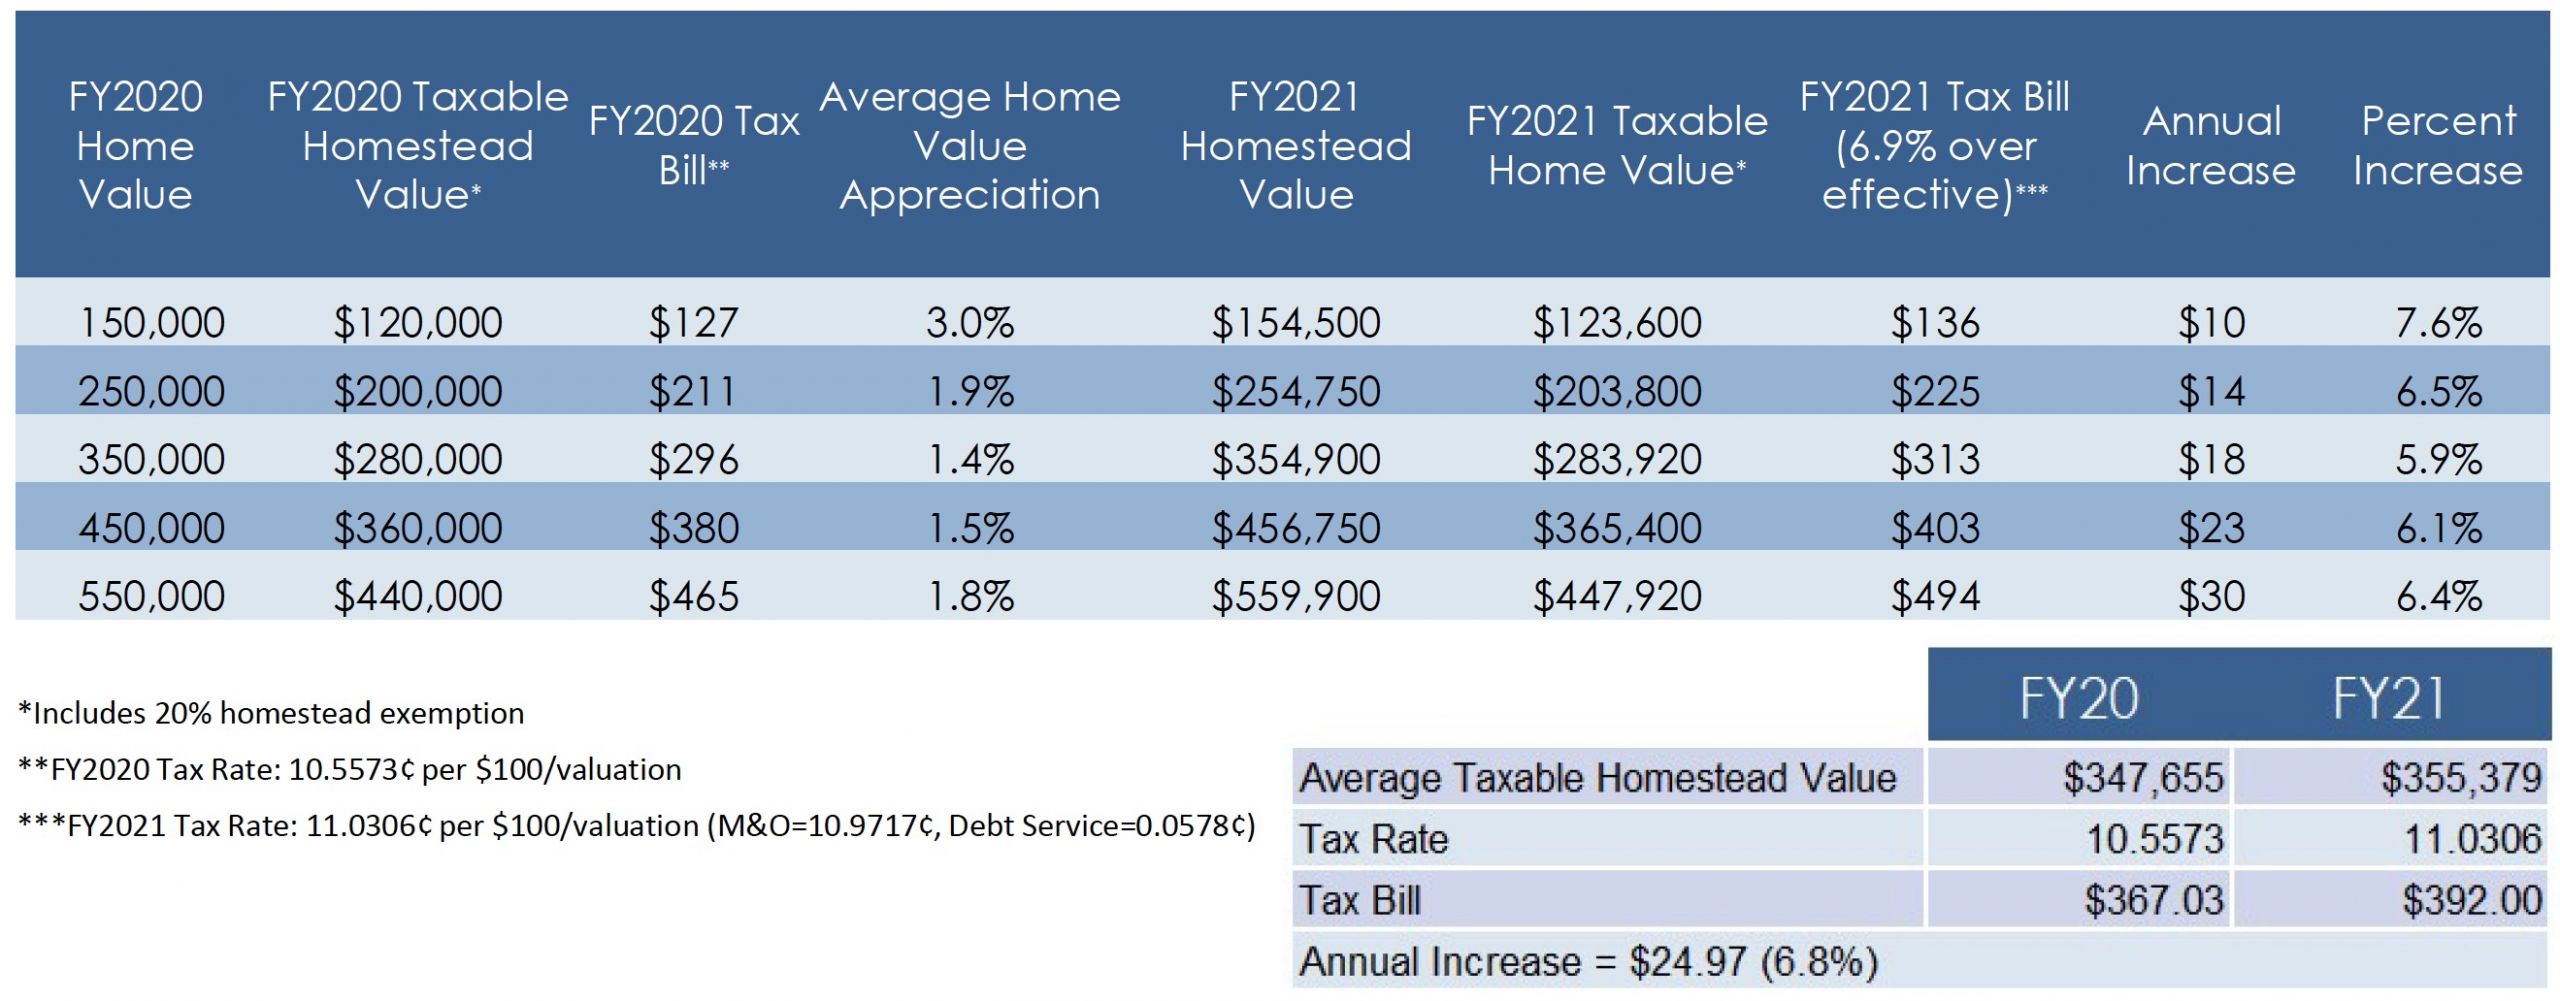 property tax impact statement FY21